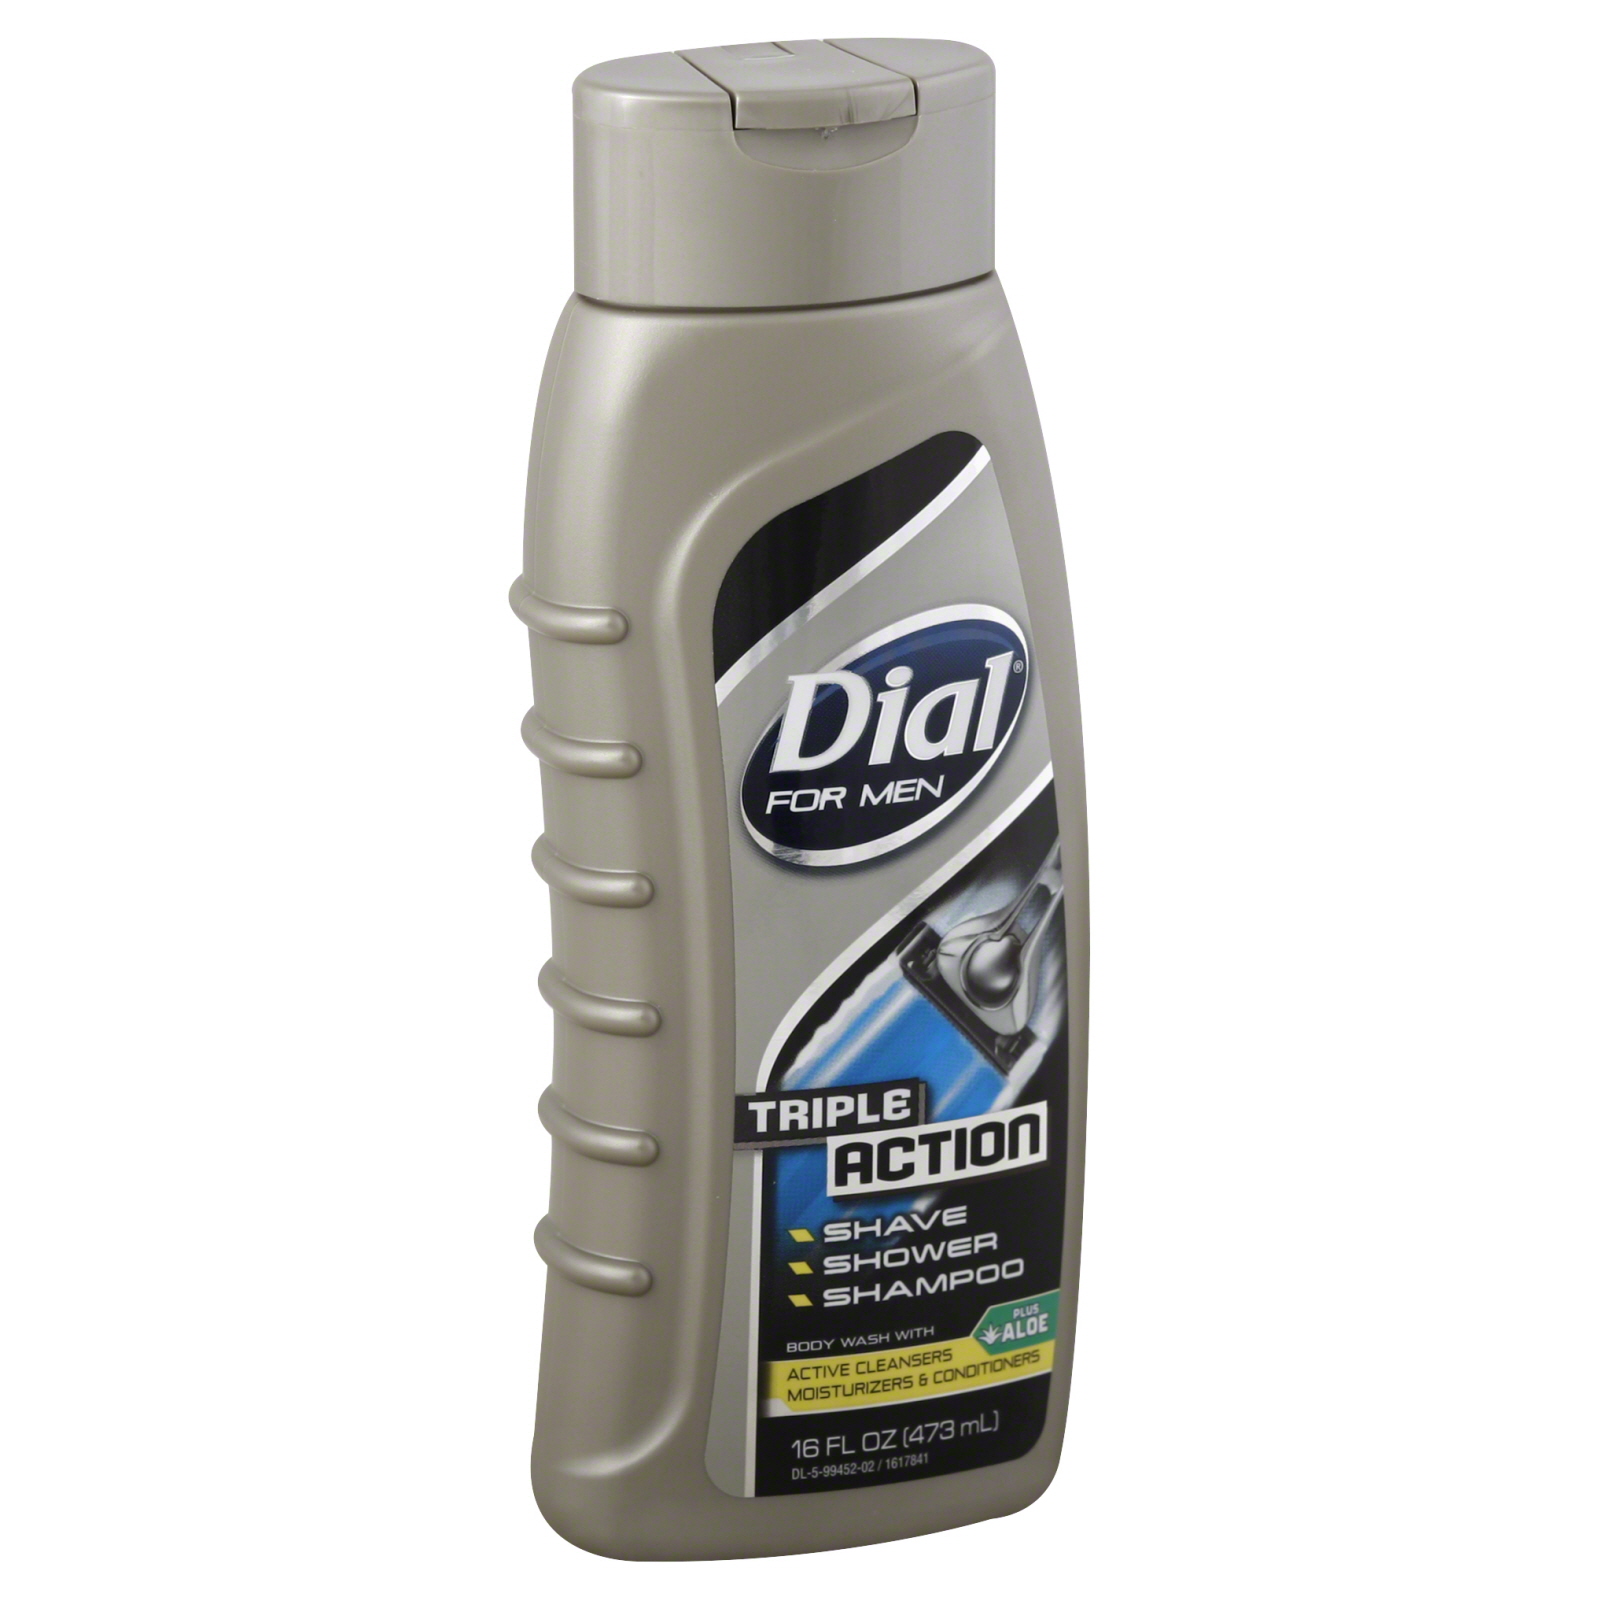 Dial Body Wash With Active Cleansers, Triple Action, For Men, 16 fl oz (473 ml)